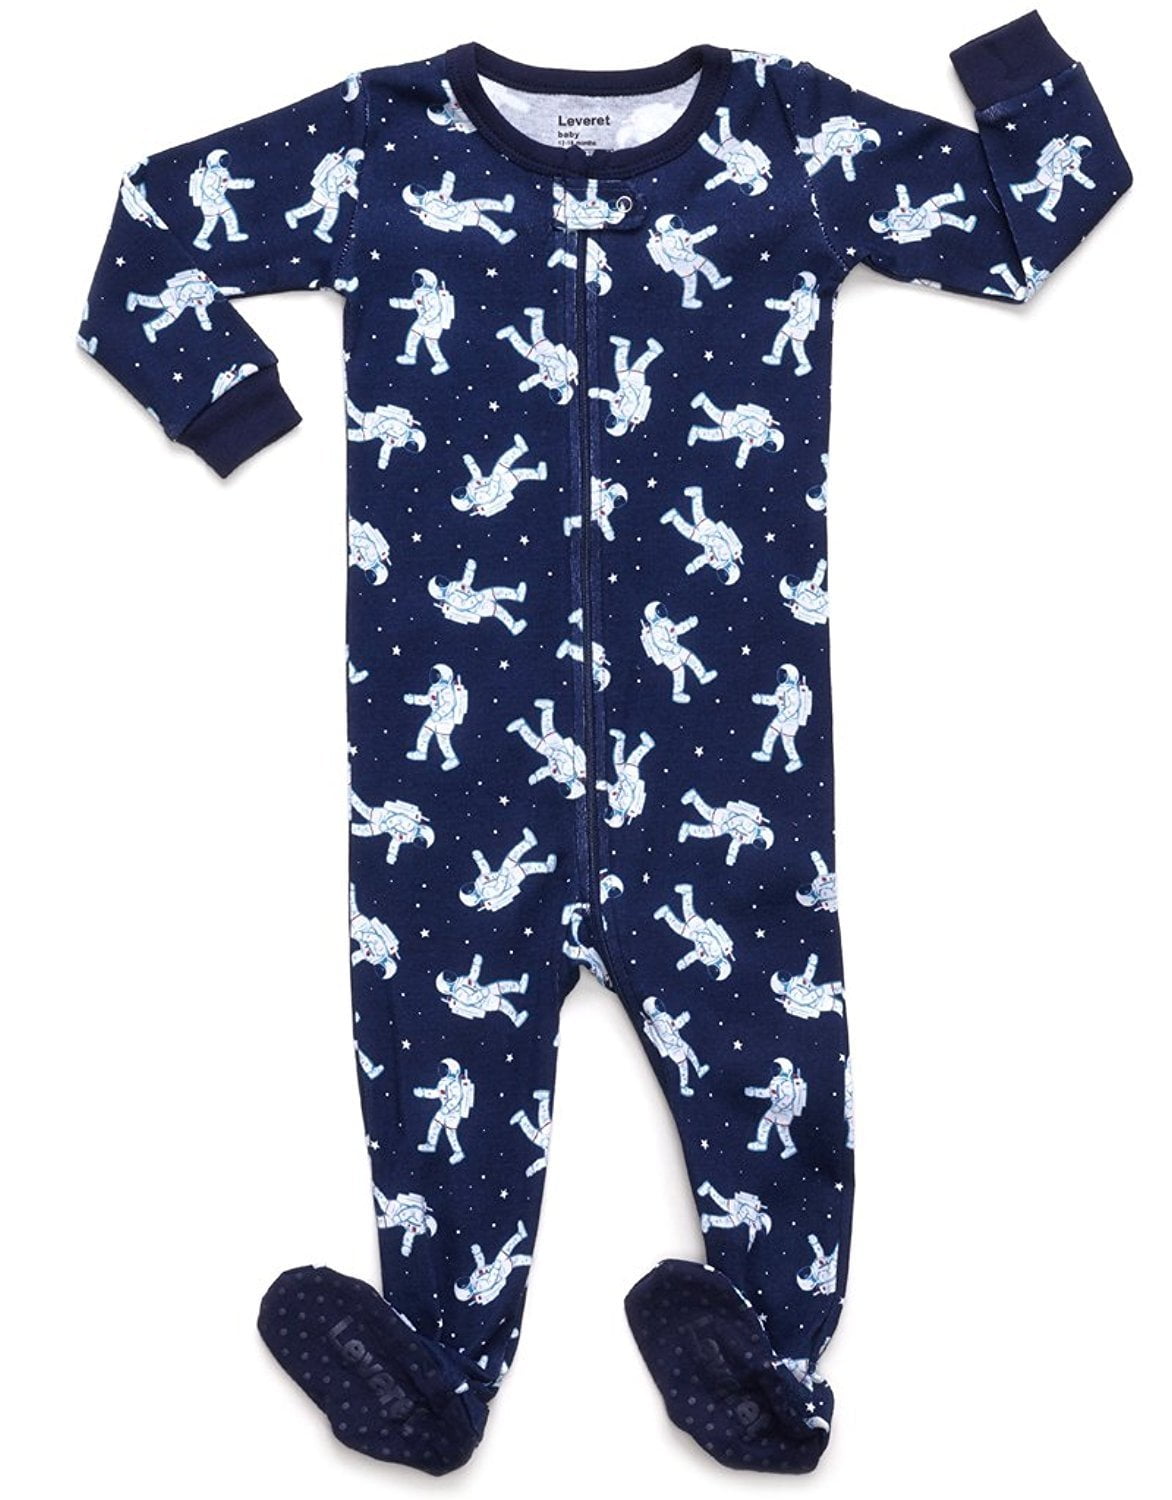 Leveret Baby Boys Baseball Footed Pajamas 6-12 Month 100% Cotton